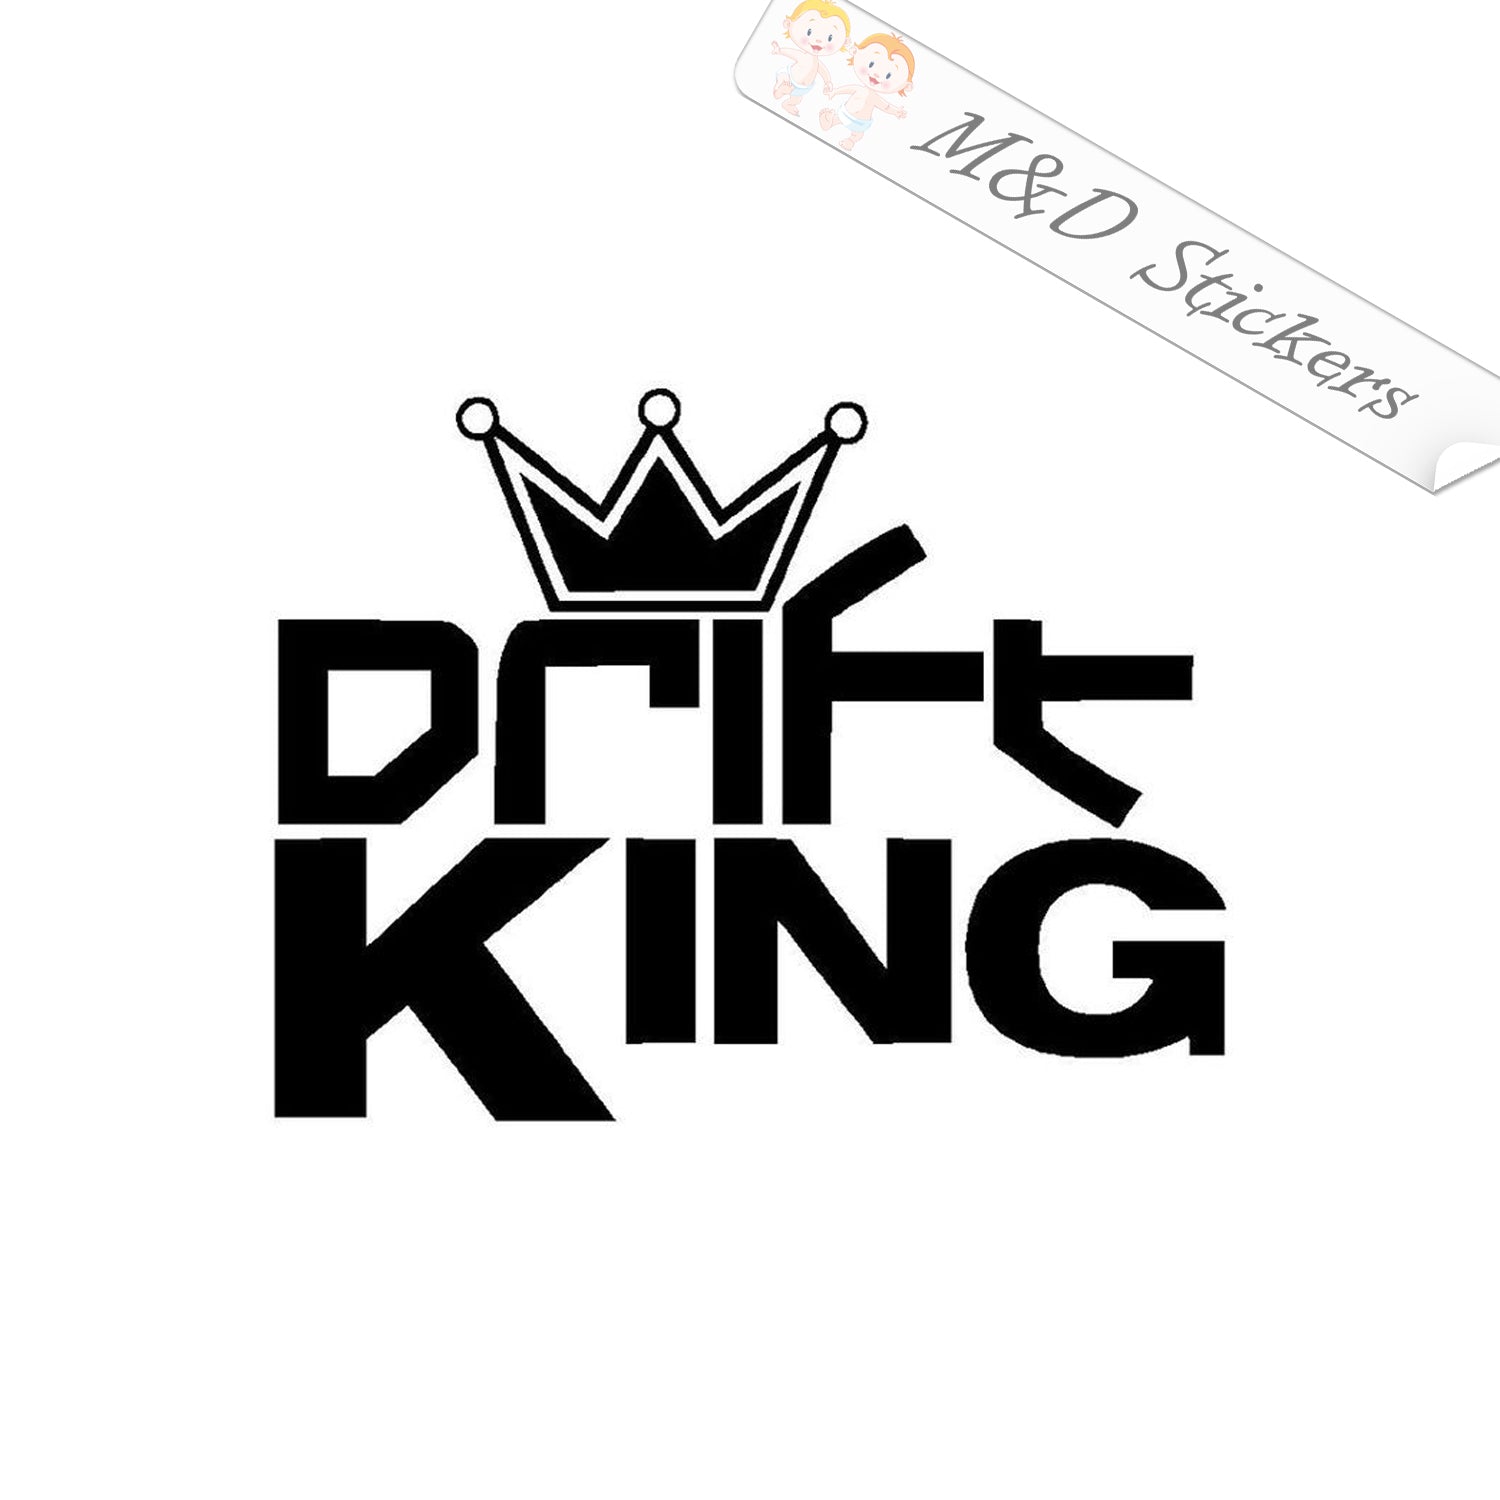 SIGN EVER Polyvinyl Chloride King Crown Logo Car Stickers Exterior Decals  Window Sides Bumper (L x H 13.00 cm x 19.00 cm, Black) -Pack of 2 :  Amazon.in: Car & Motorbike